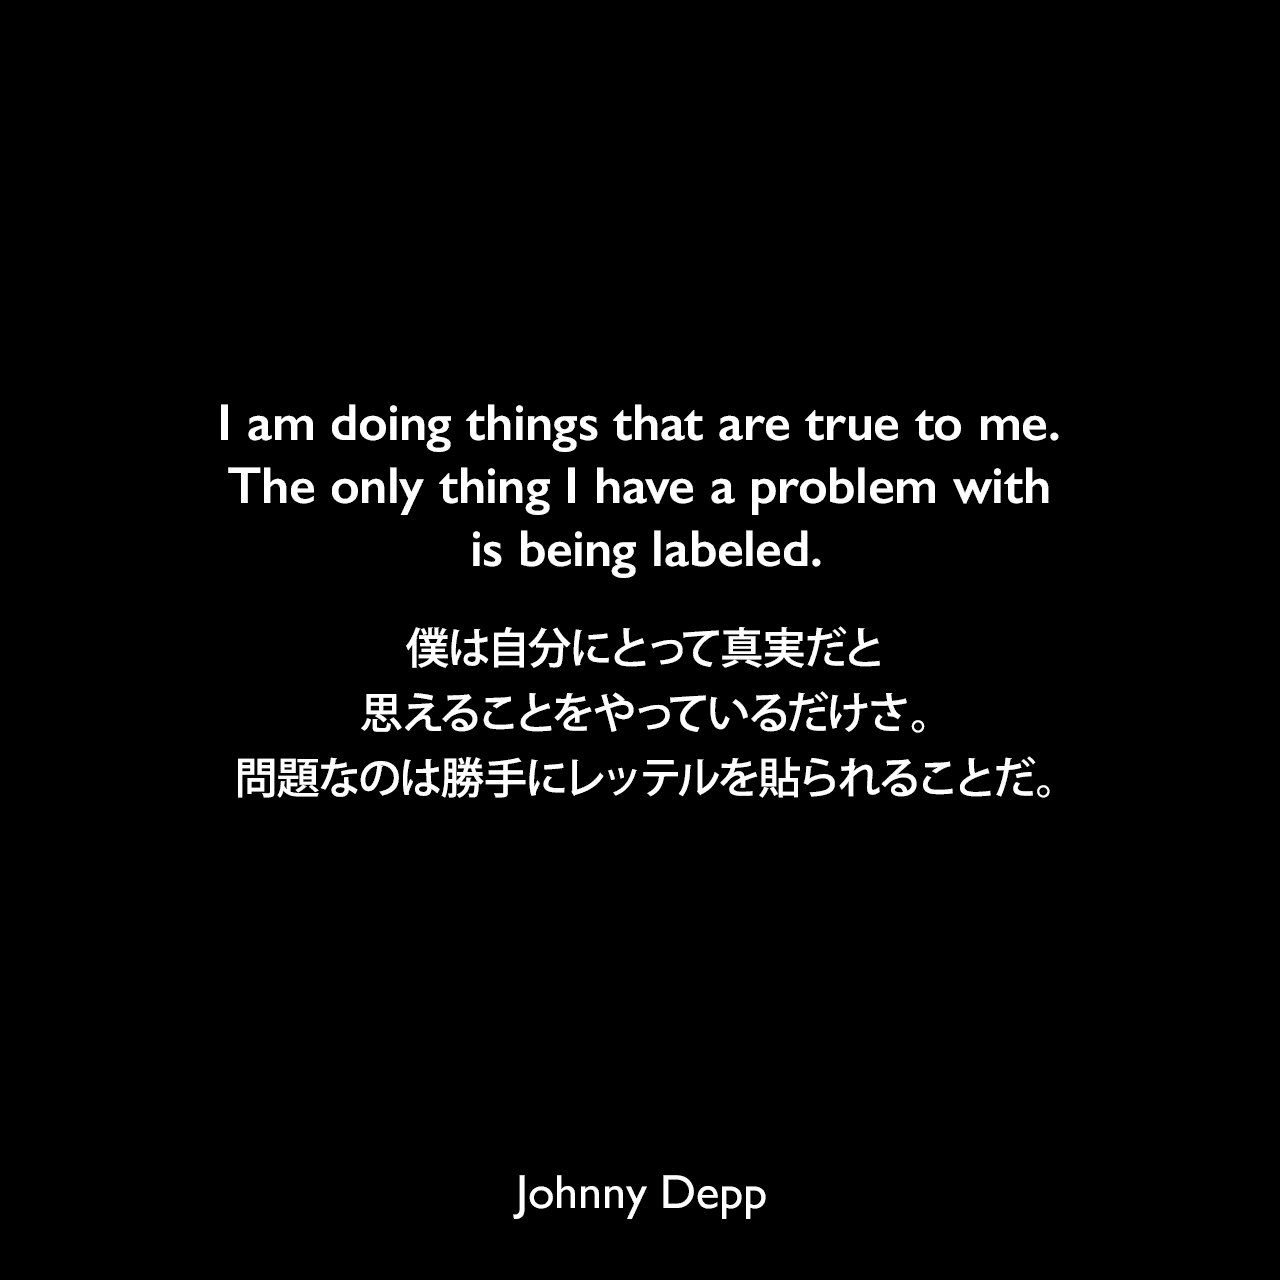 I am doing things that are true to me. The only thing I have a problem with is being labeled.僕は自分にとって真実だと思えることをやっているだけさ。問題なのは勝手にレッテルを貼られることだ。Johnny Depp